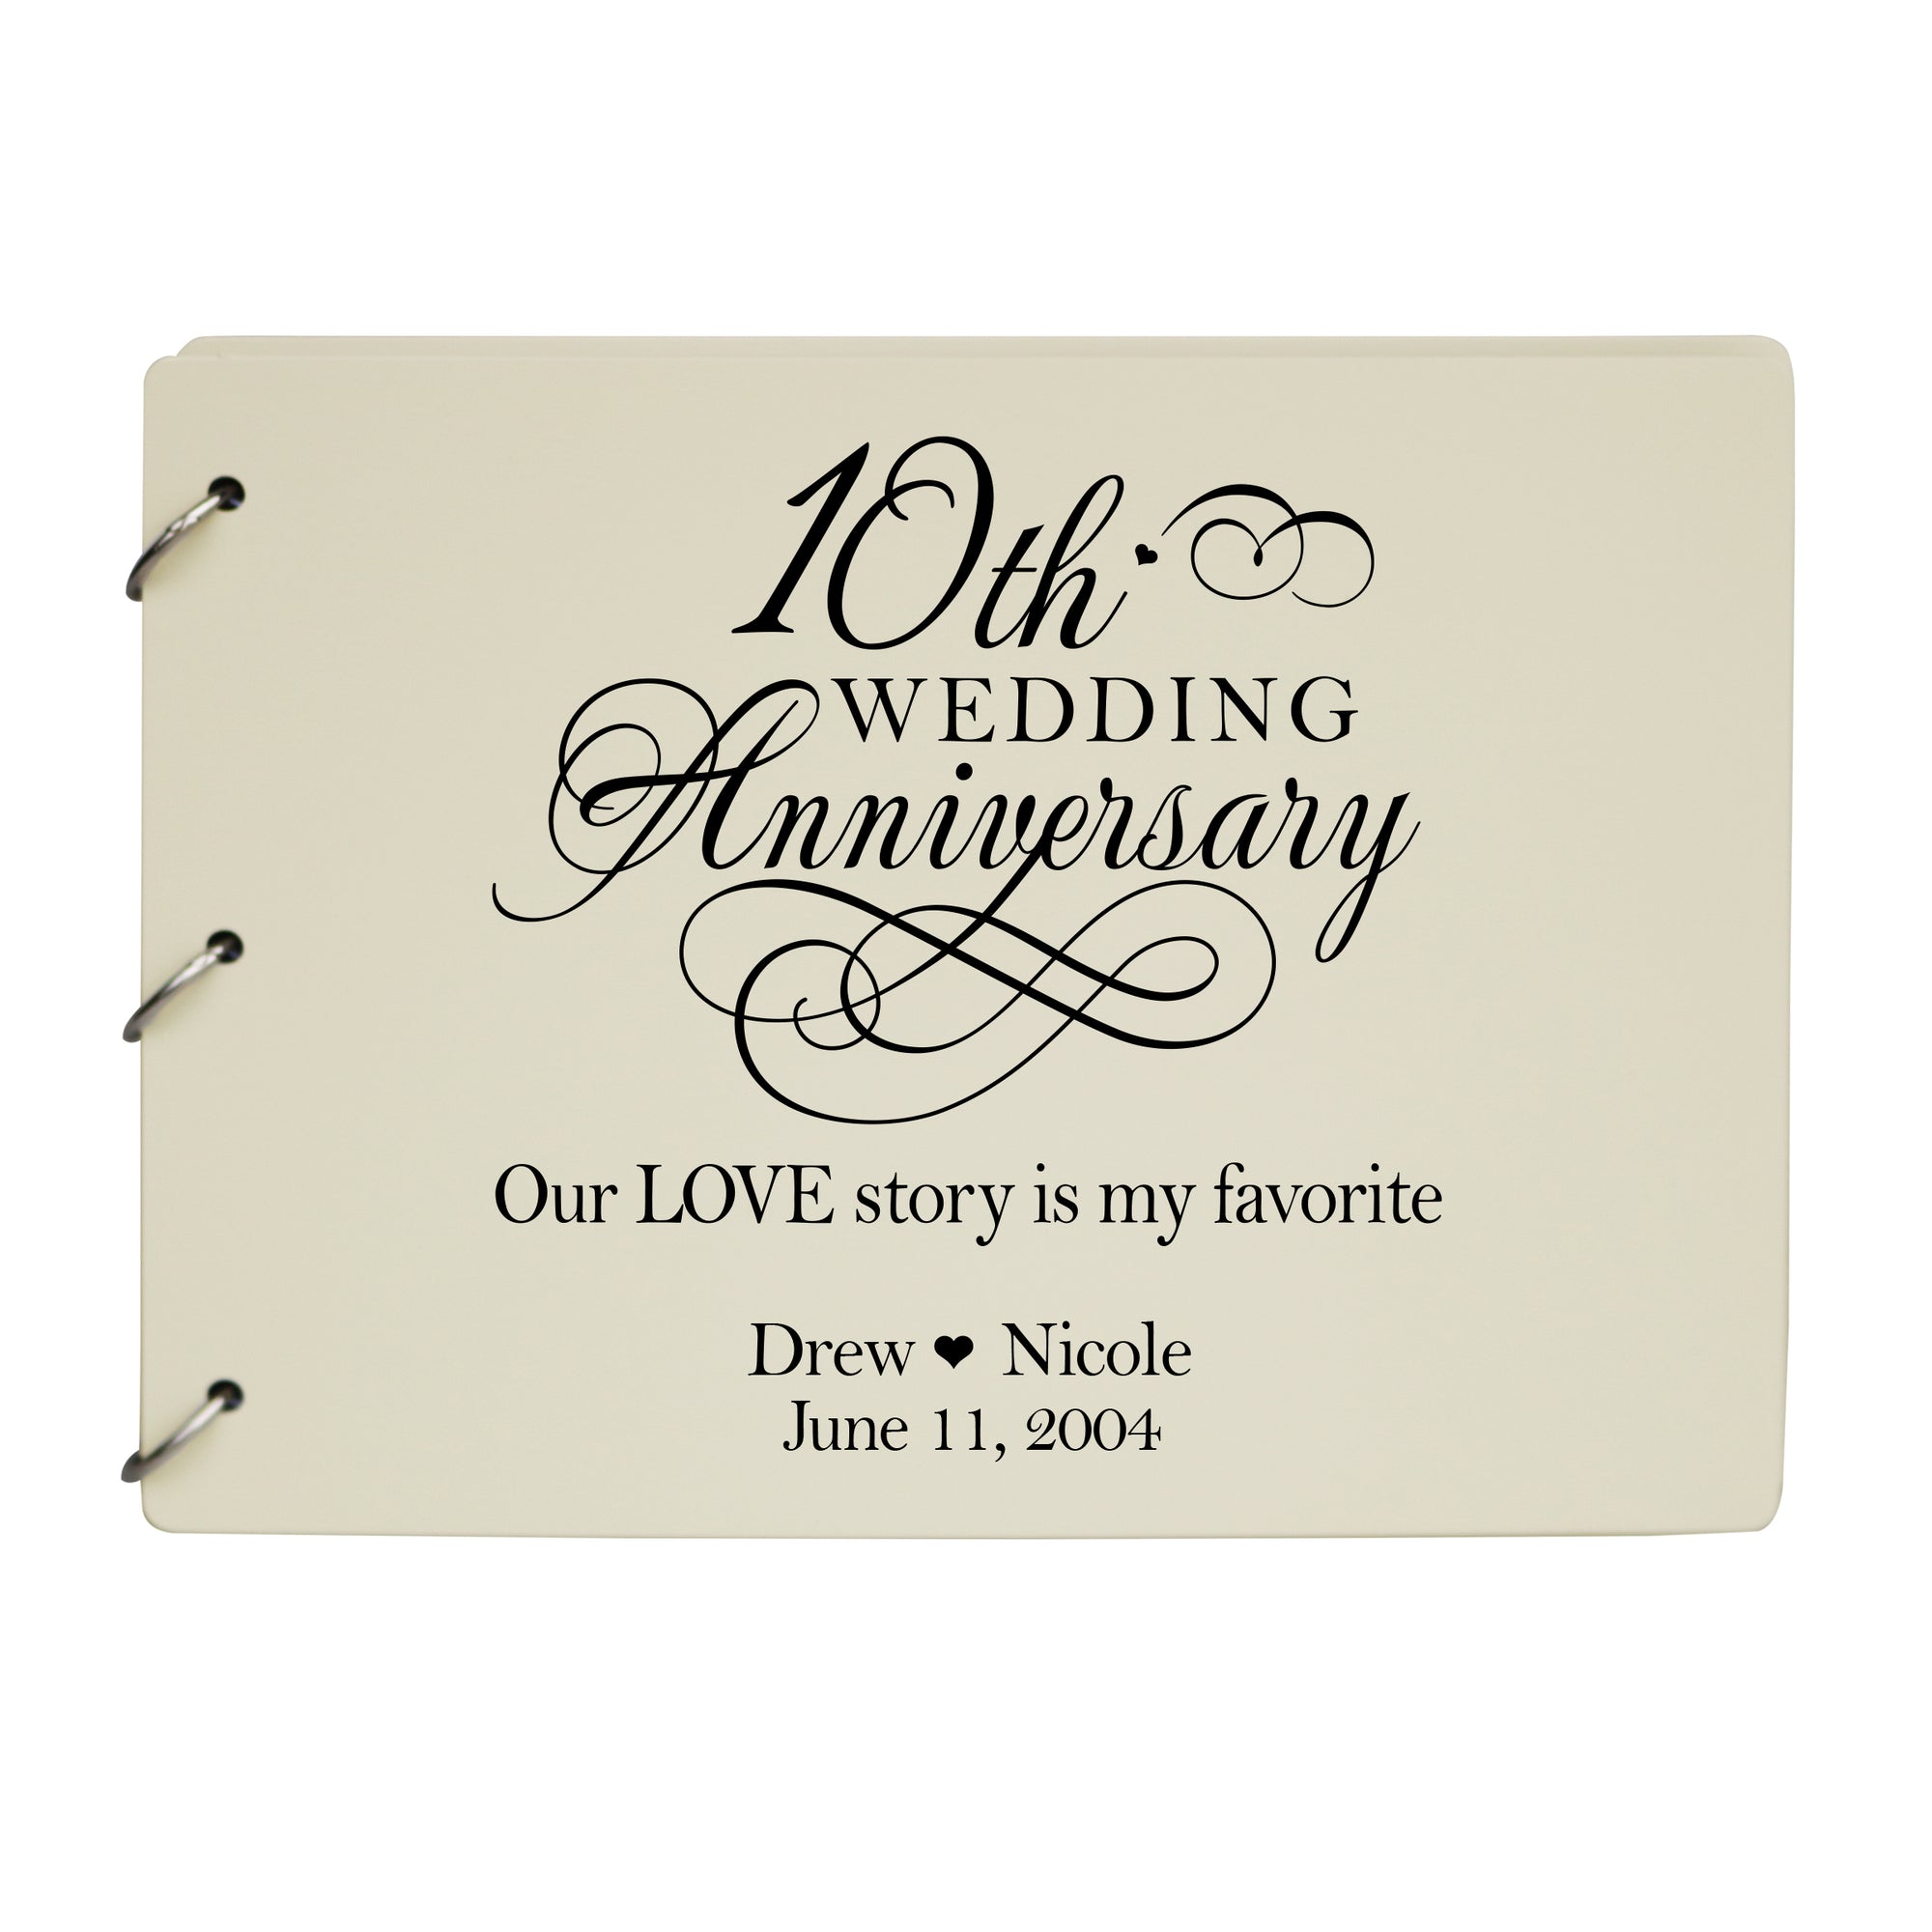 LifeSong Milestones Personalized Guestbook Sign for 10th Wedding Anniversary Gift Ideas